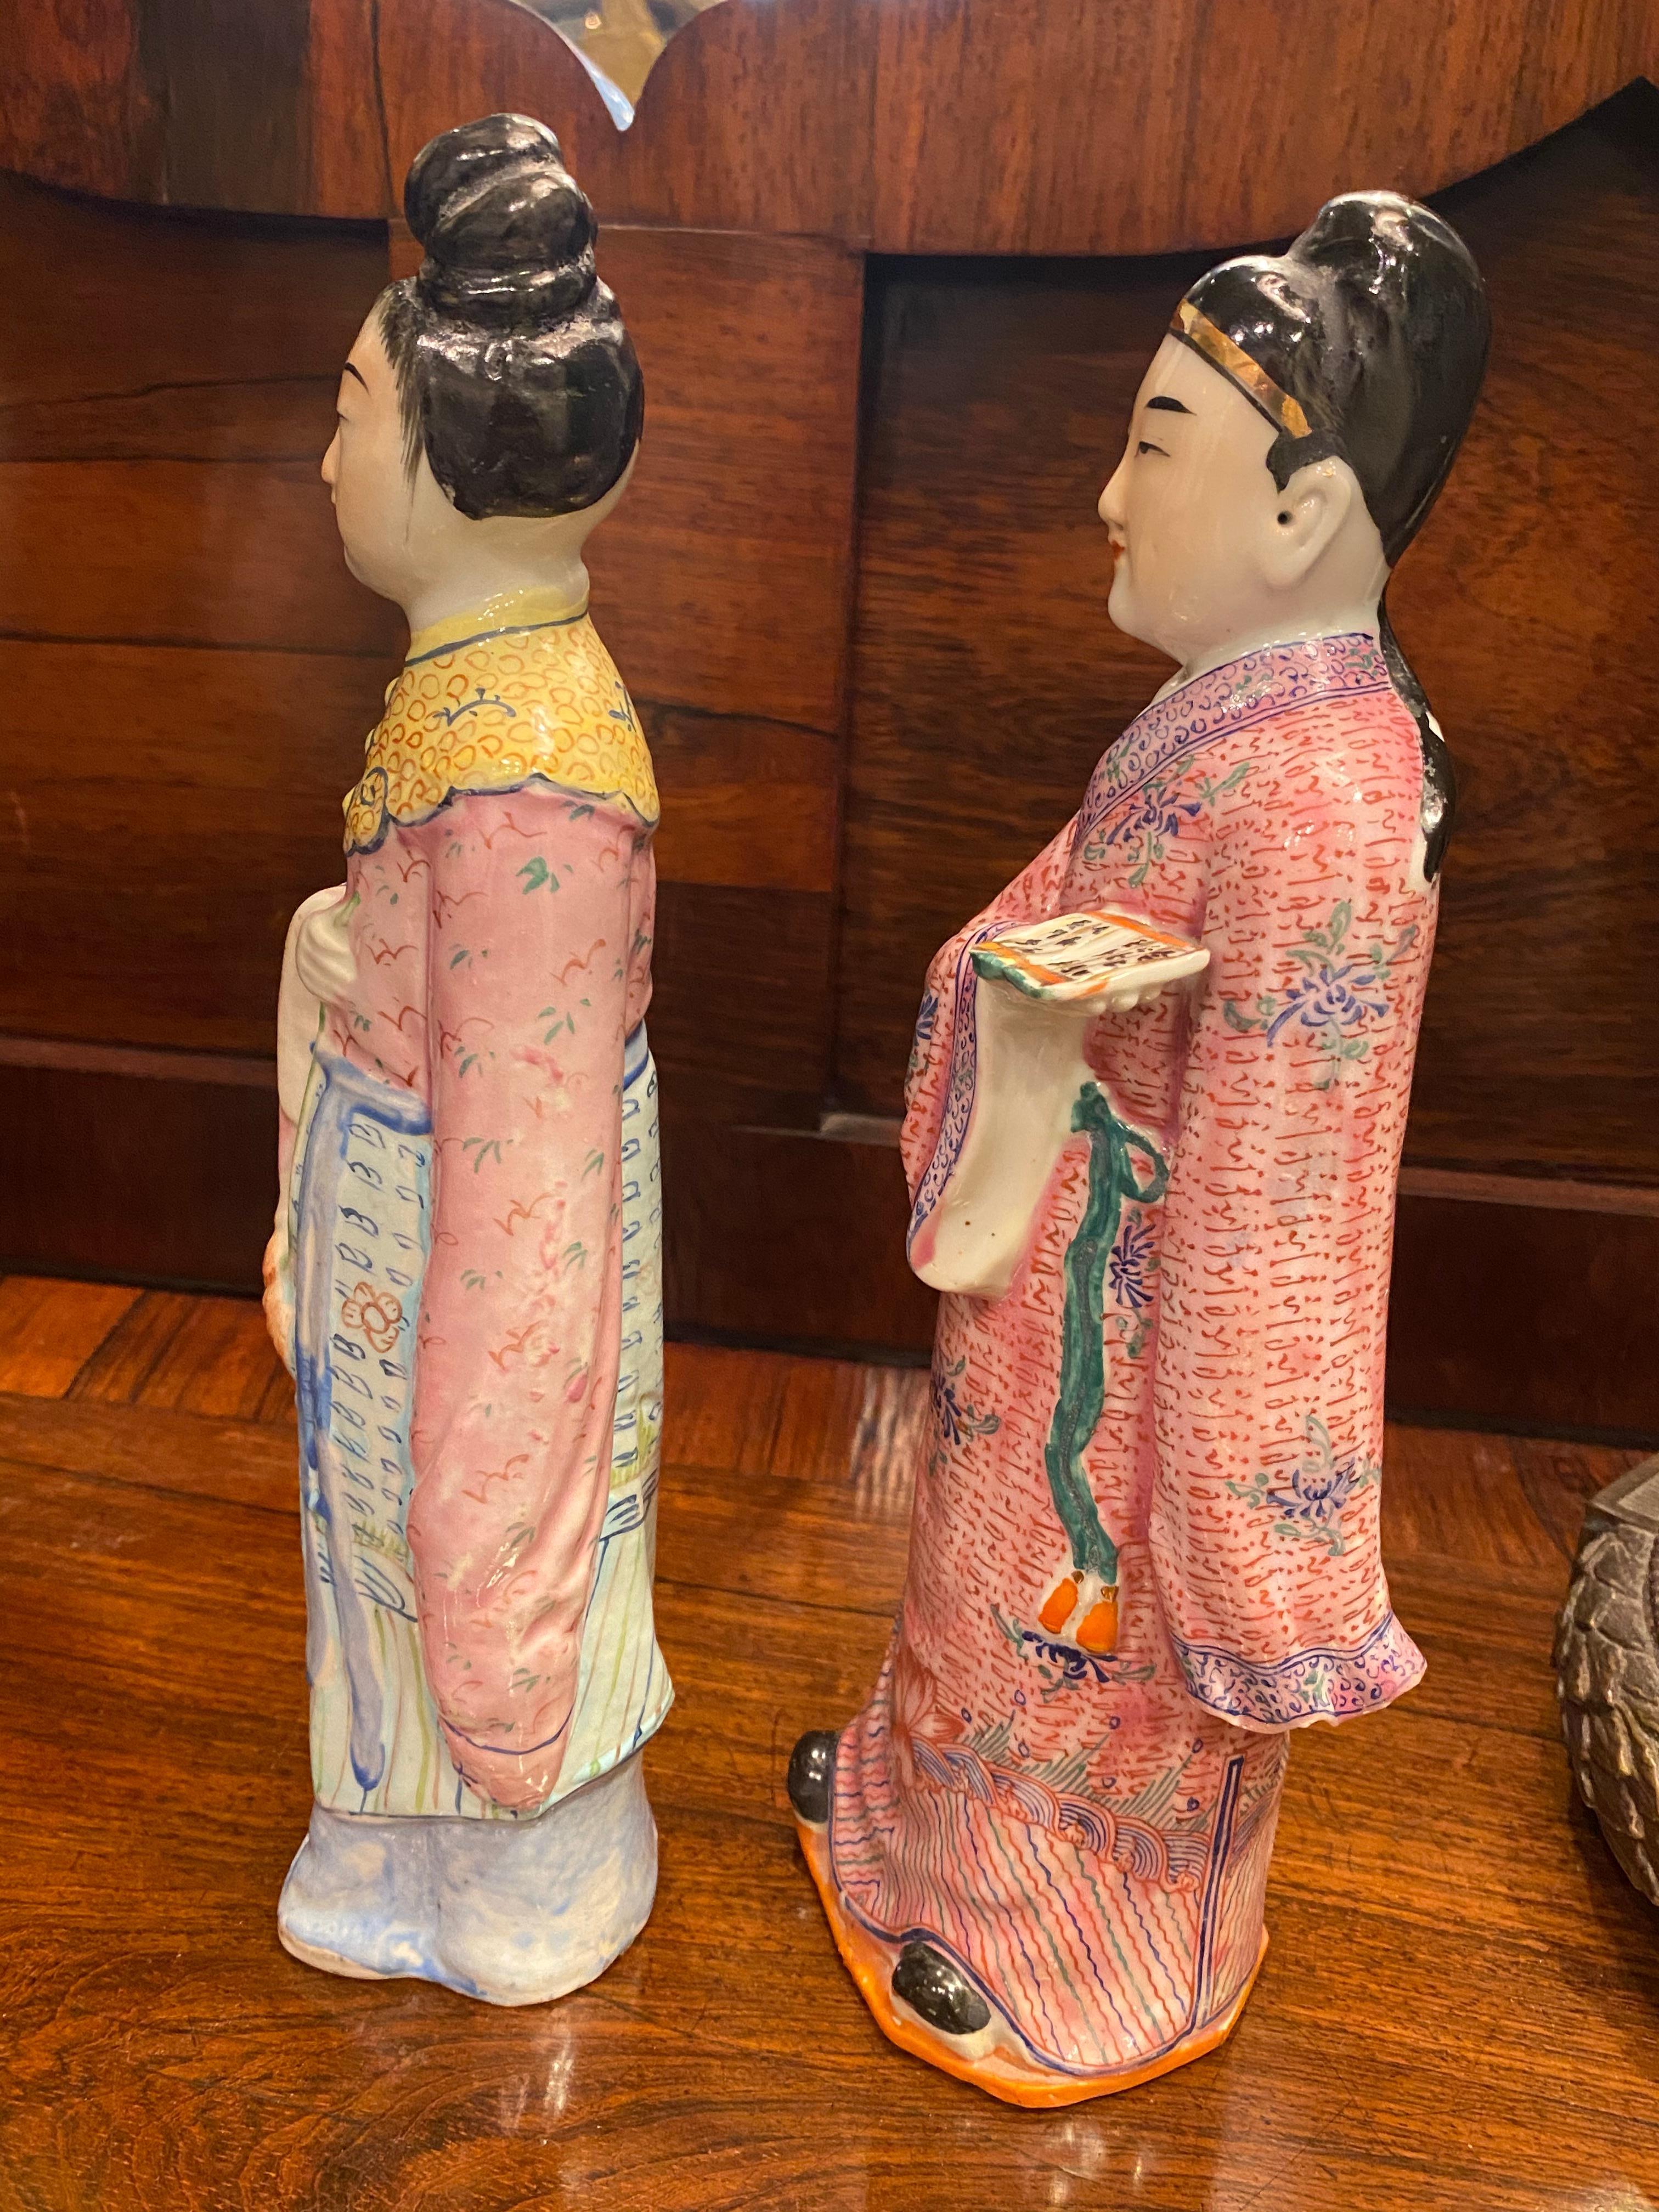 A wonderful pair of Chinese porcelain statues hand painted in enamel with heavy detail in the design of the robes, the faces are painted well. She is marked and do not see a mark on him but they are a pair.